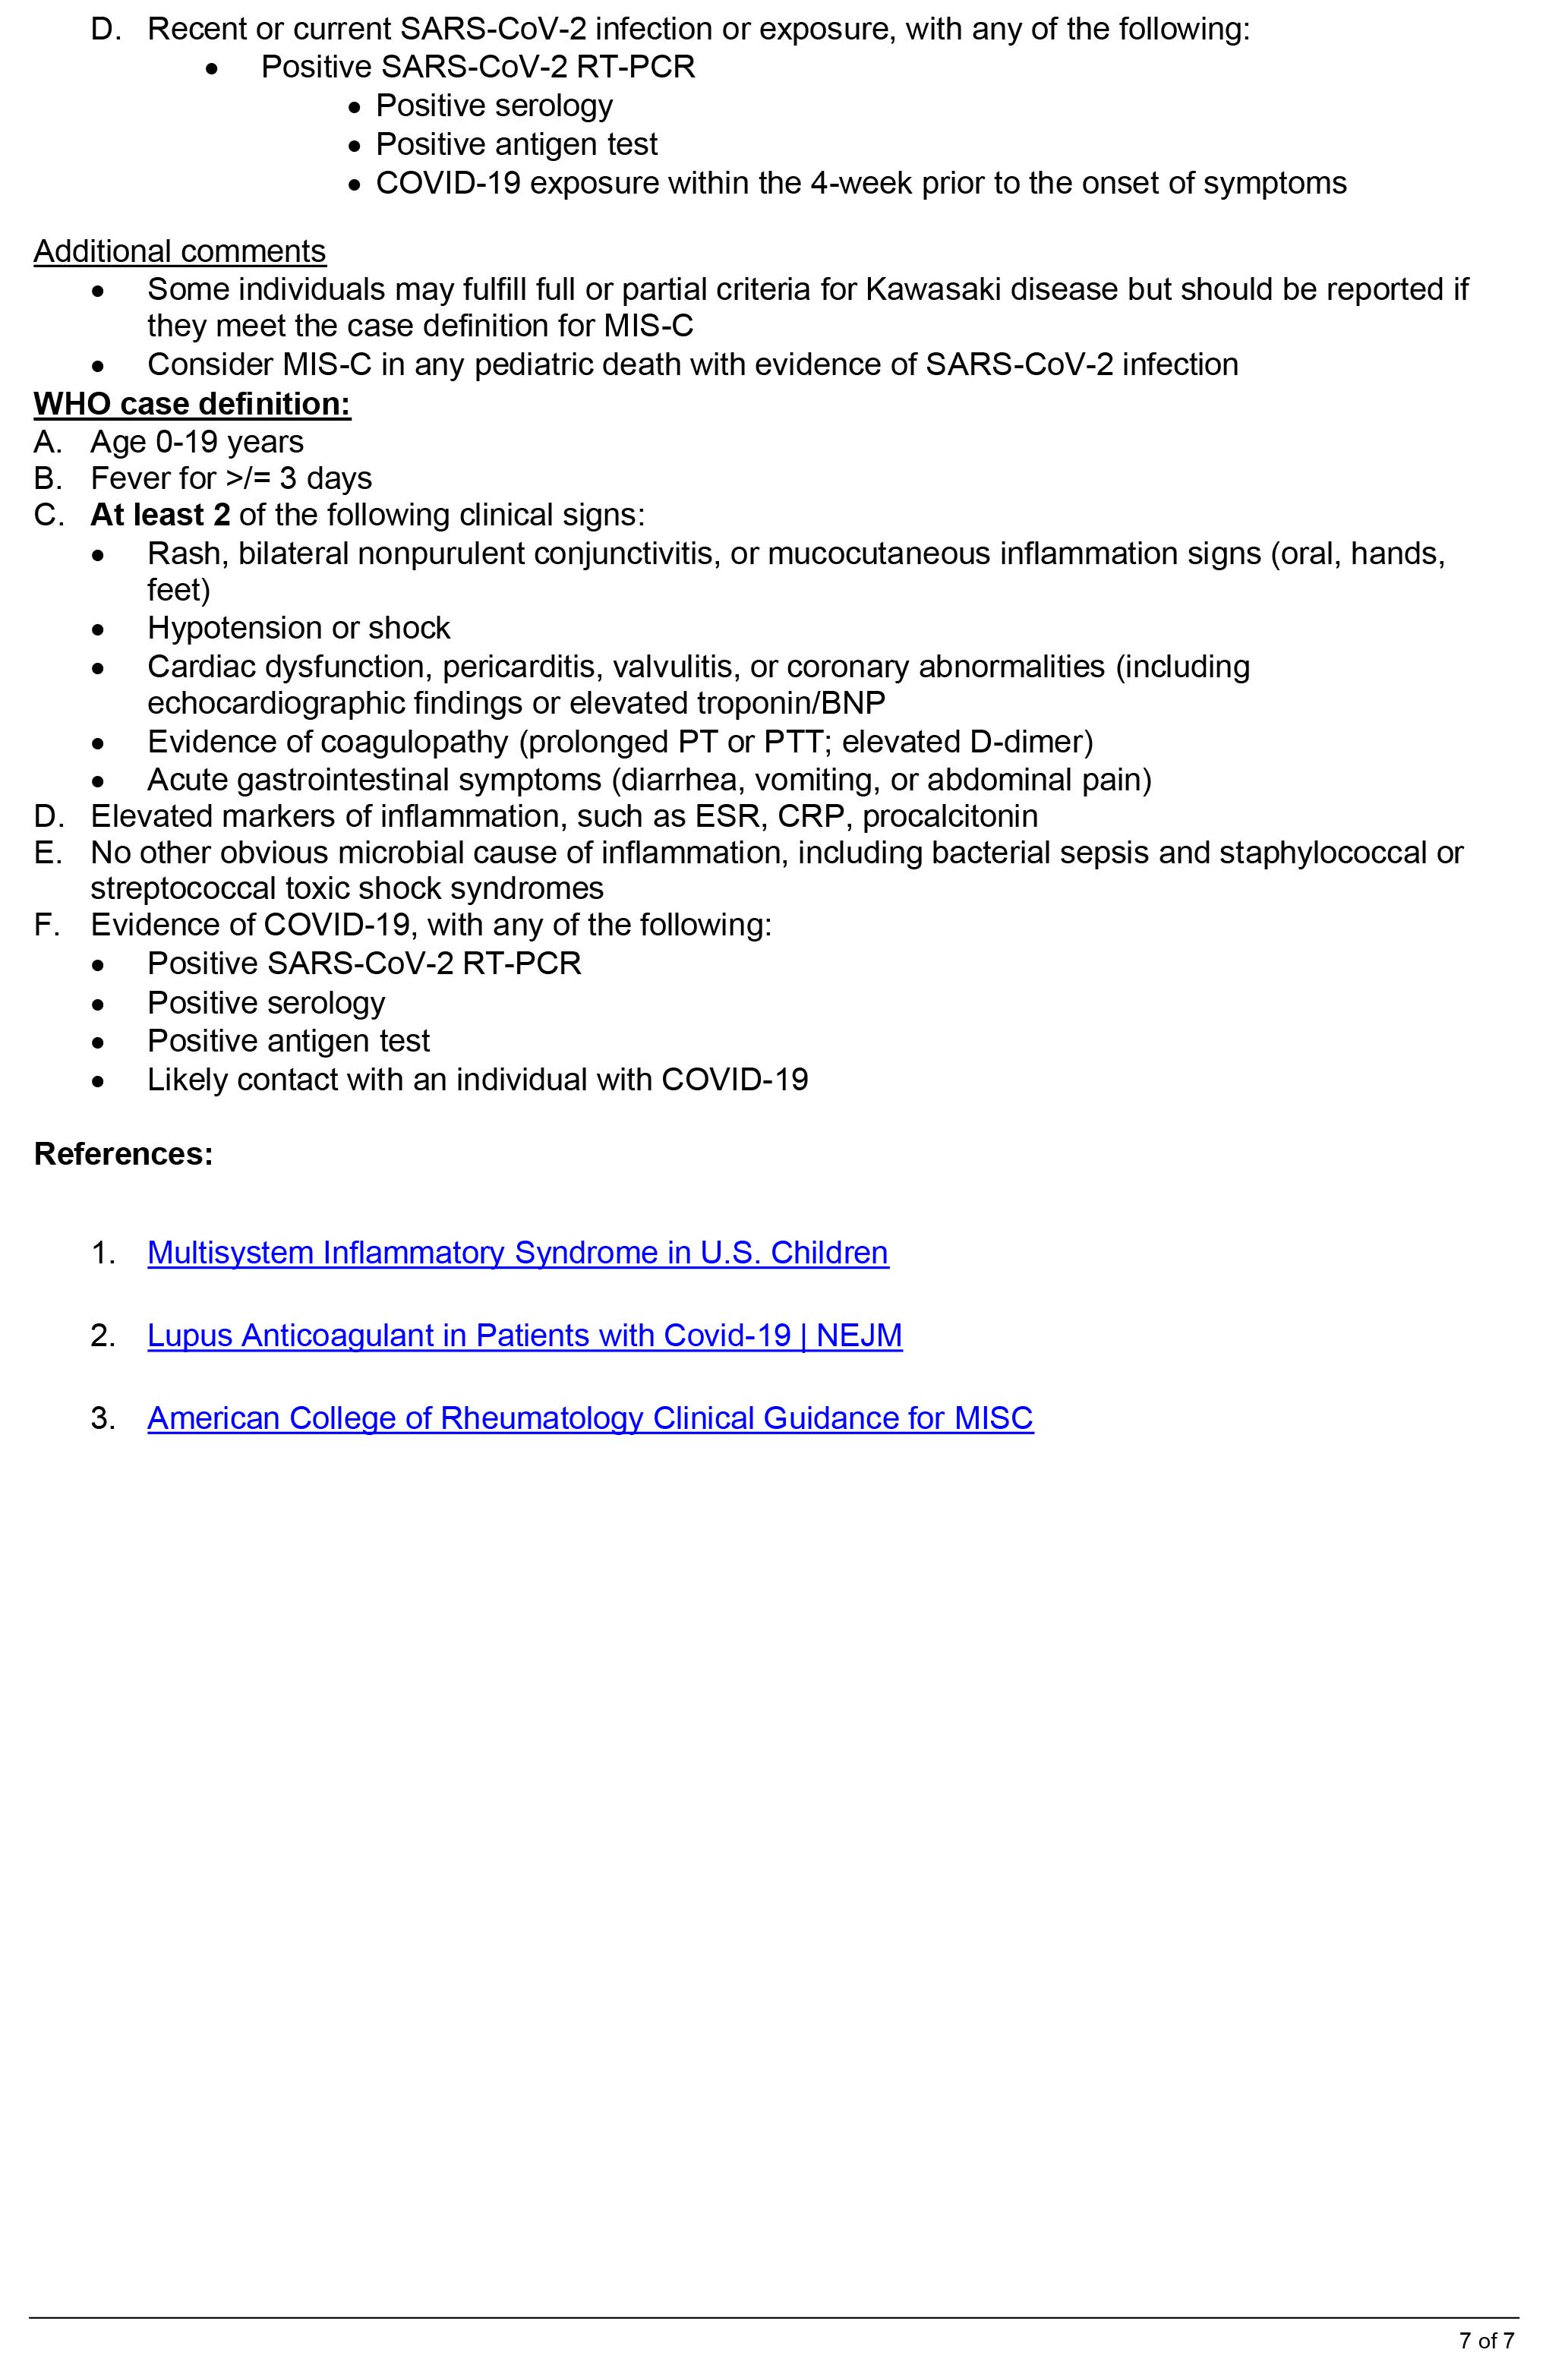 Clinical Guidelines Document Image 7